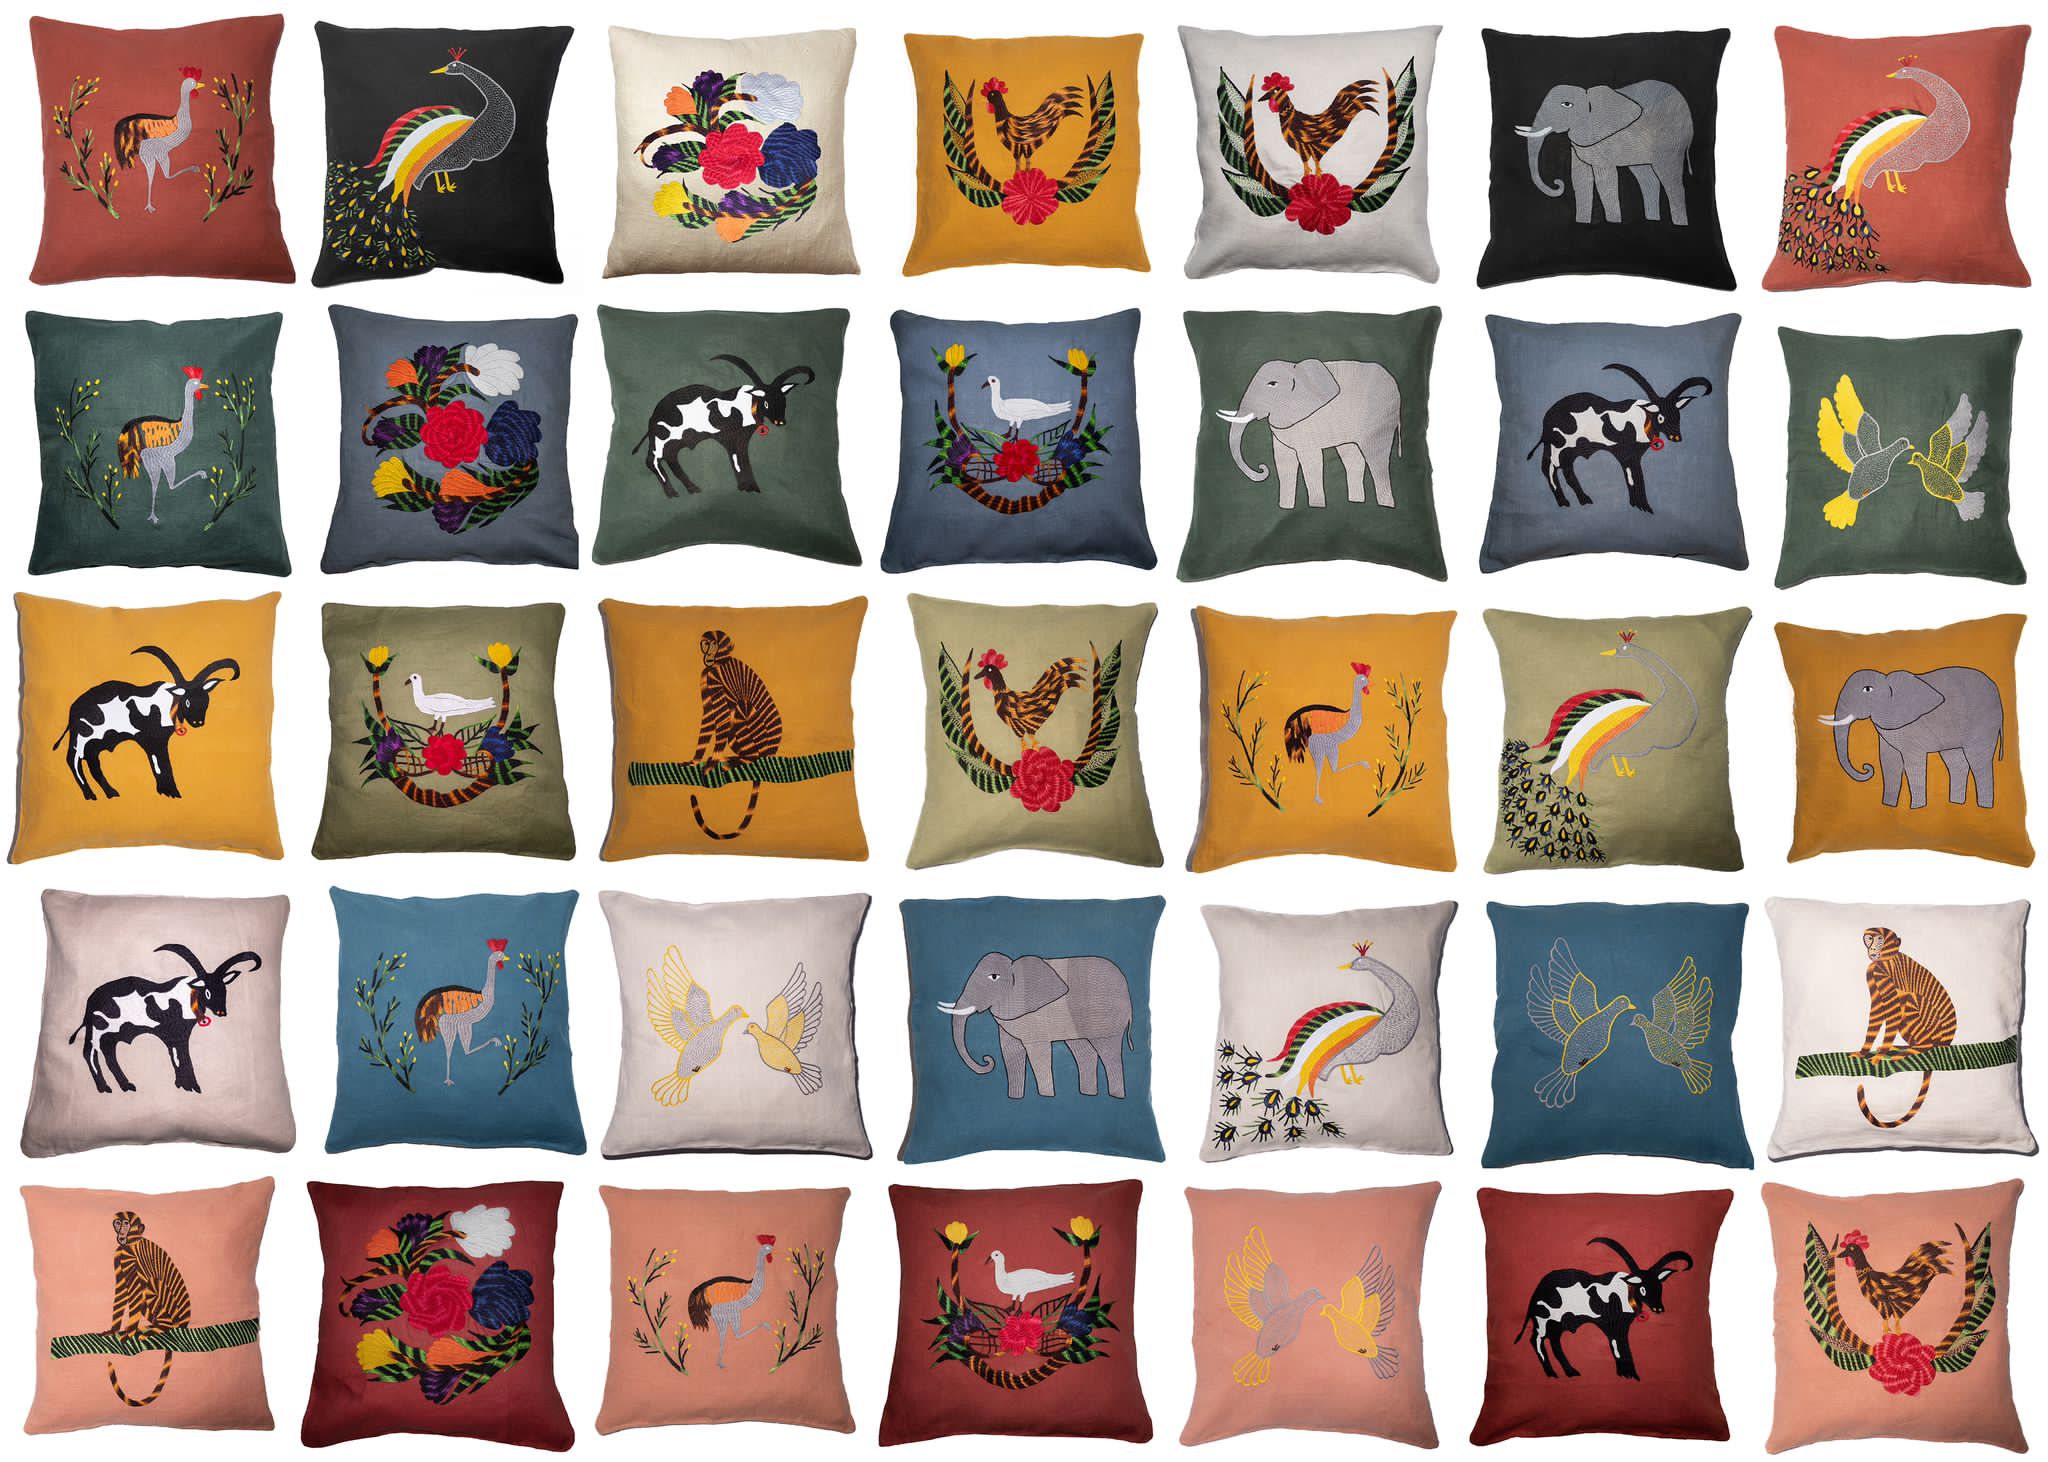 Give the gift of a Milaya pillow